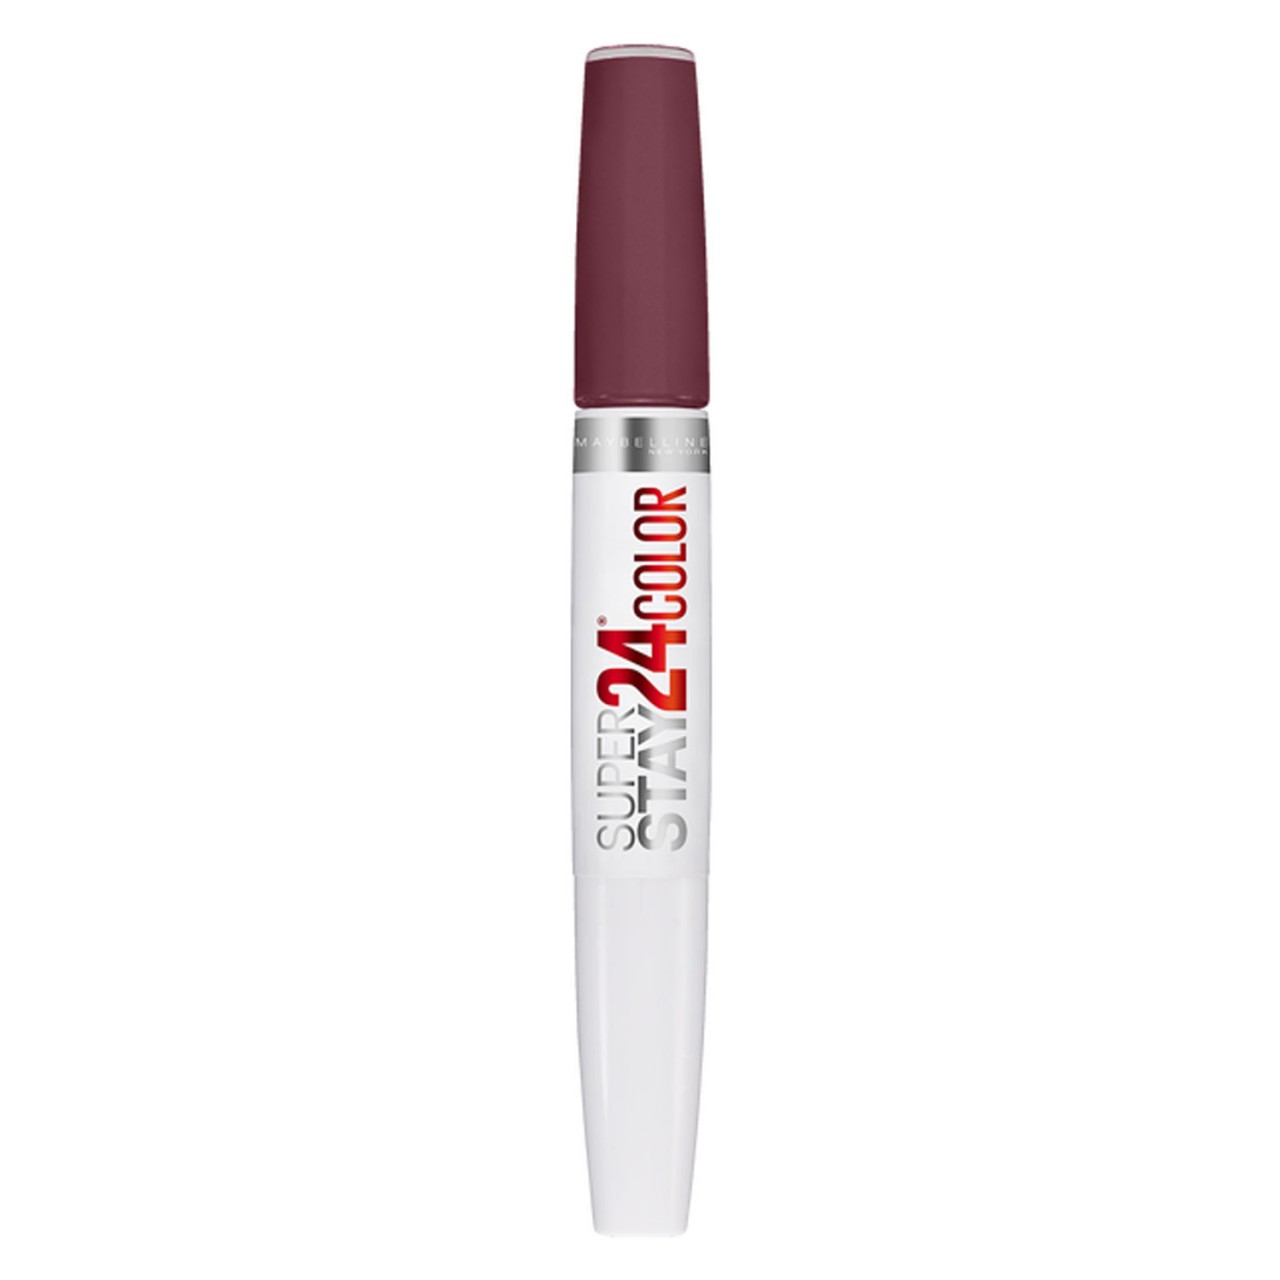 Maybelline NY Lips - Super Stay 24H Optic Brights Lippenstift Nr. 850 Frosted Mauve von Maybelline New York